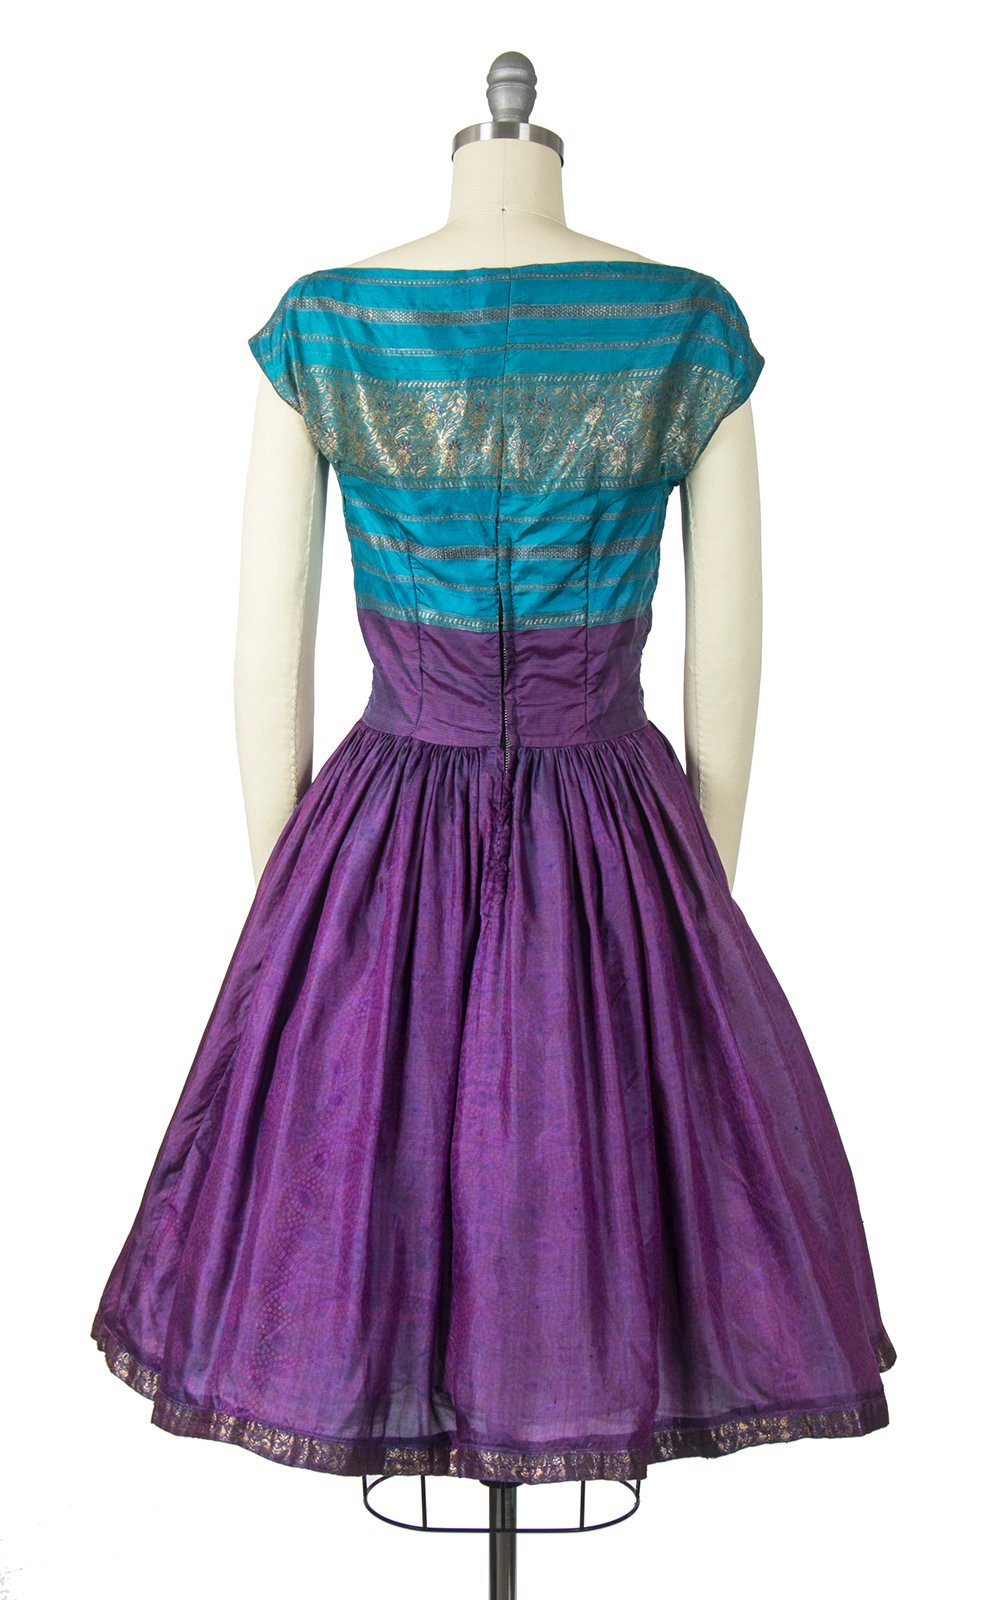 Vintage 1950s Dress | 50s Silk Color Block Indian Style Metallic Floral Blue Purple Full Skirt Party Dress (small)